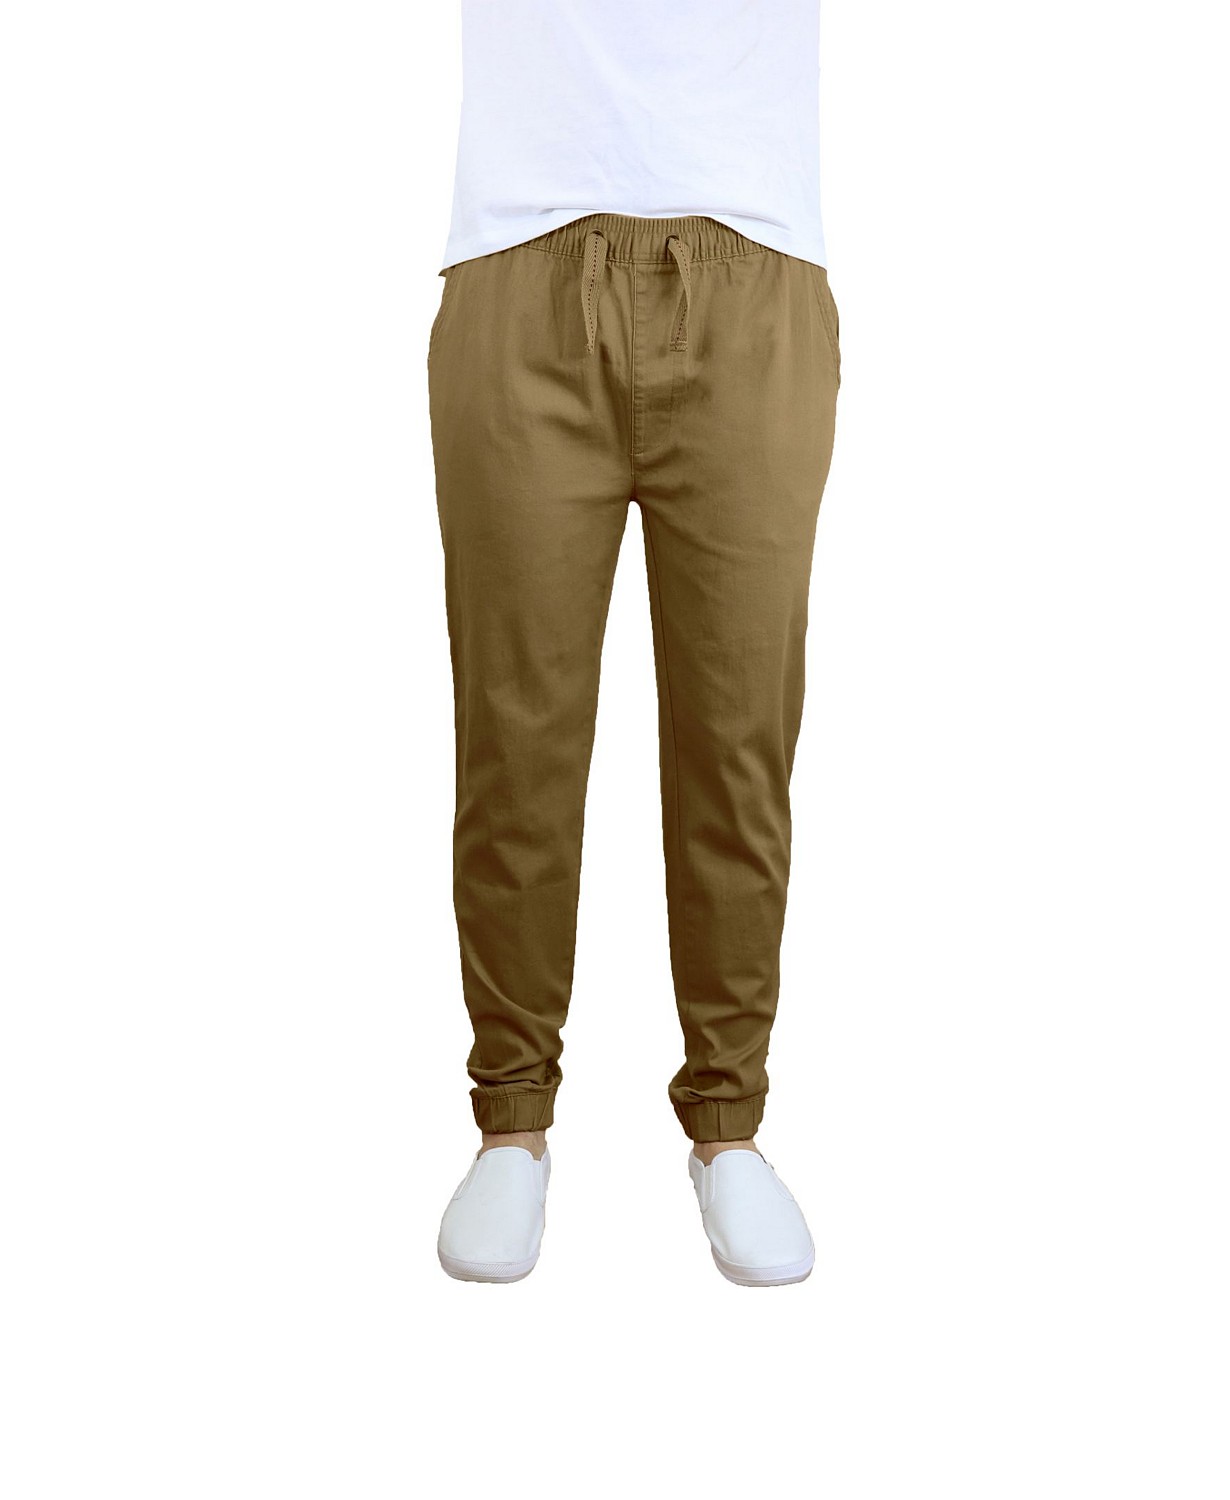 Galaxy by Harvic Men's Basic Stretch Twill Joggers $10.20, Volcom Men's Booker Fleece Joggers $19.20, More + Free Store Pickup at Macy's or FS on $25+